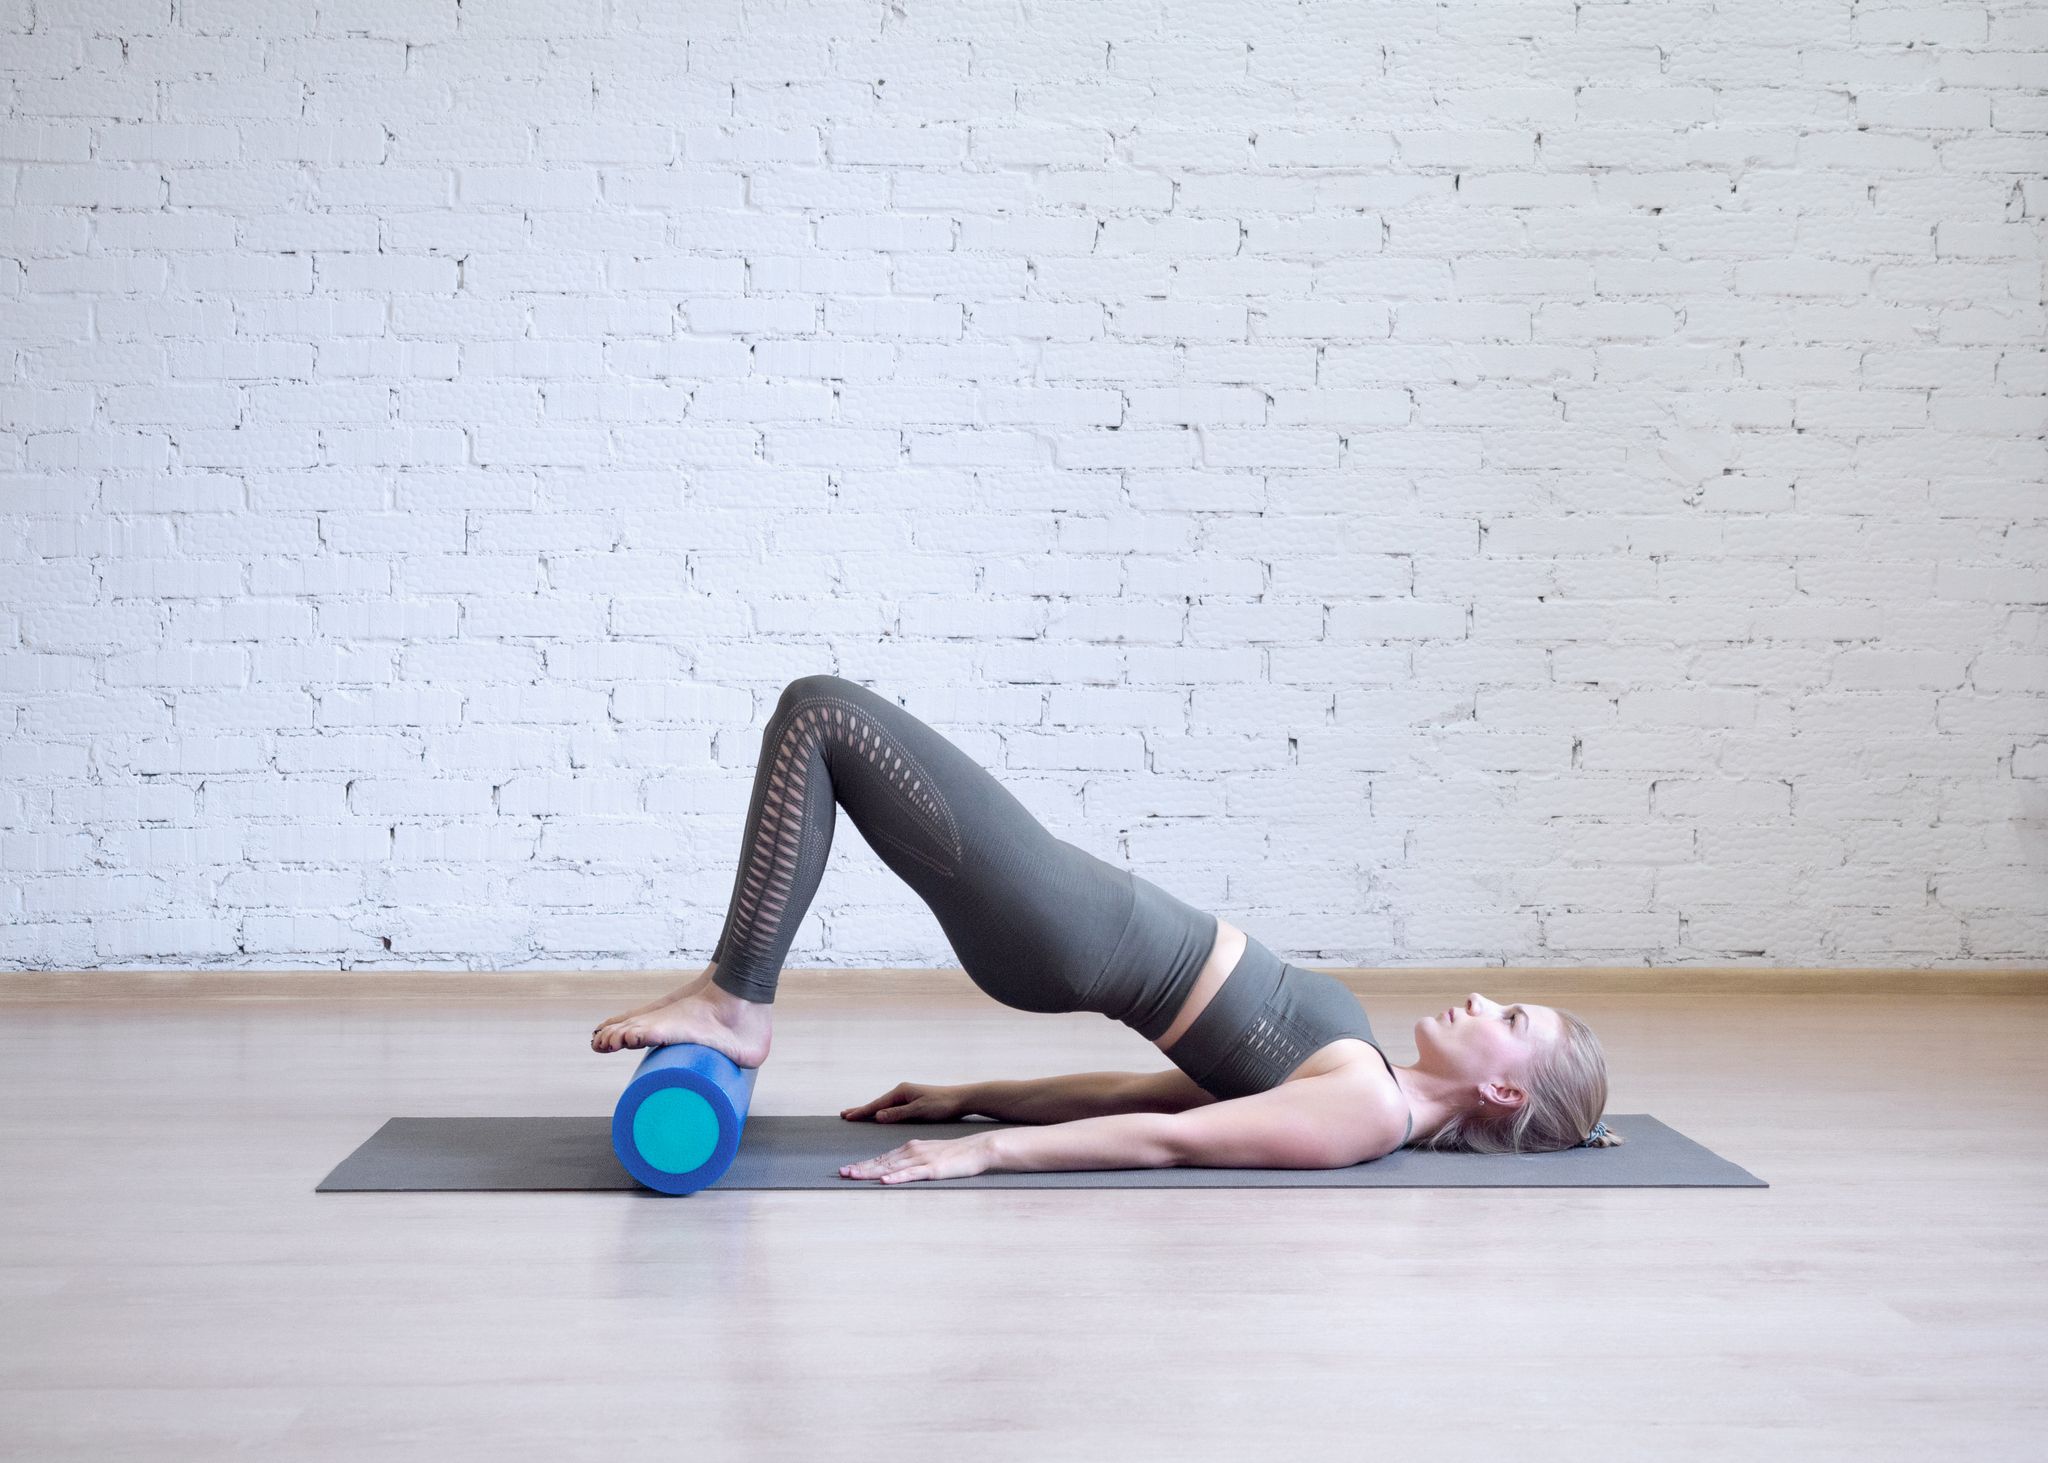 6-Minute Full-Body Foam Roller Routine For Recovery